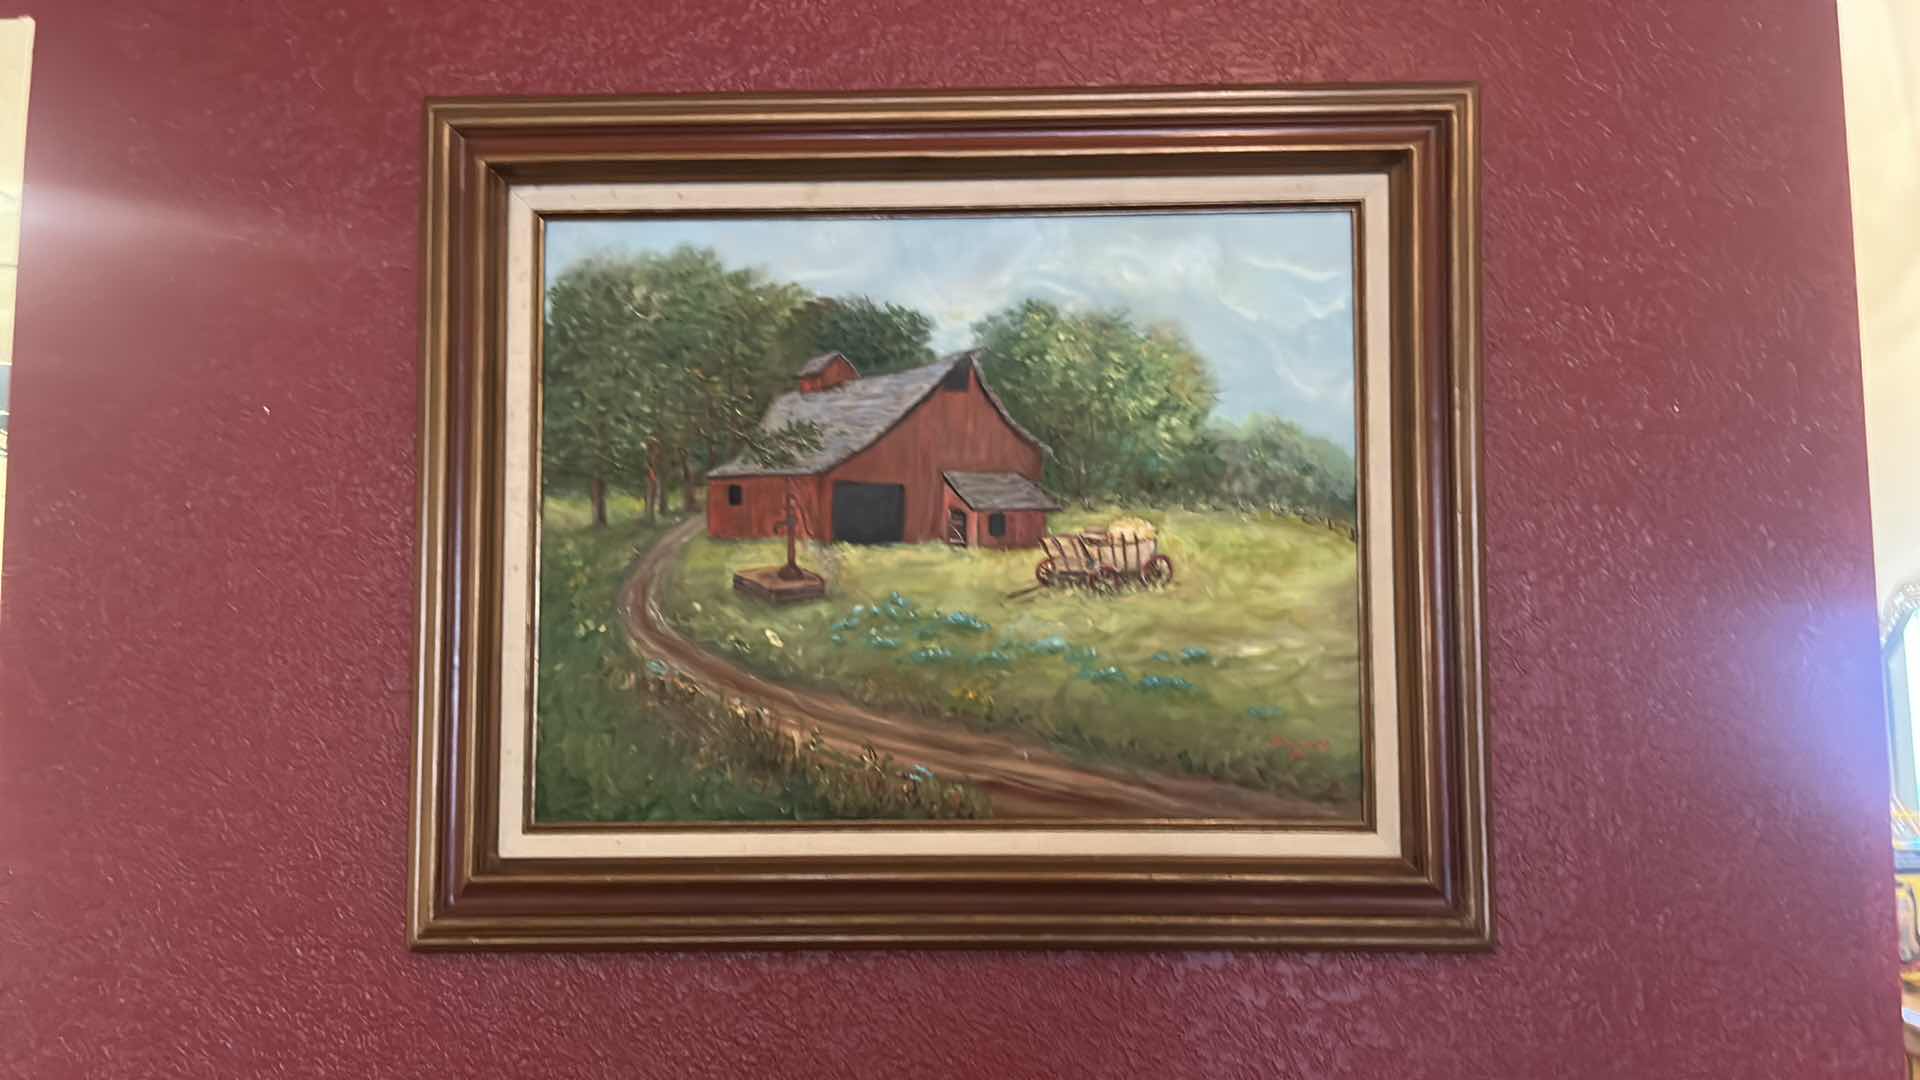 Photo 6 of SIGNED OIL ON CANVAS “RED BARN” WOOD FRAMED 31” x 25”